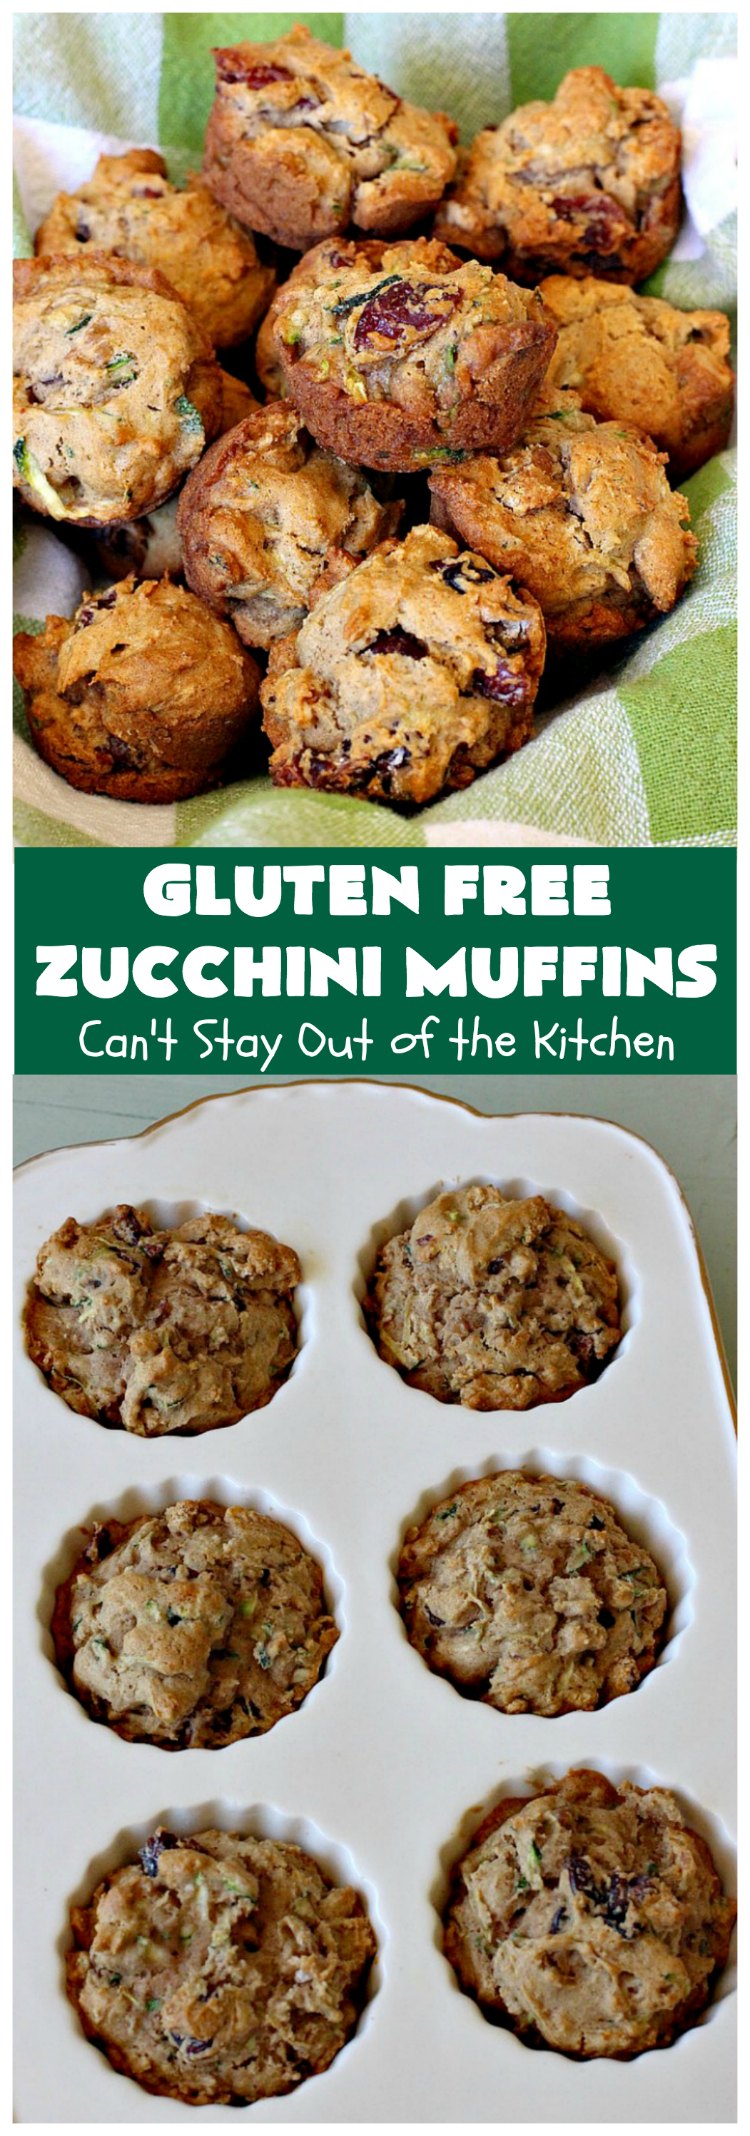 Gluten Free Zucchini Muffins | Can't Stay Out of the Kitchen | these #healthy, #GlutenFree #muffins are outrageously good! Filled with #zucchini, #DriedCranberries & #walnuts and just explode in taste. #ZucchiniMuffins #breakfast #Holiday #HolidayBreakfast #GlutenFreeZucchiniMuffins